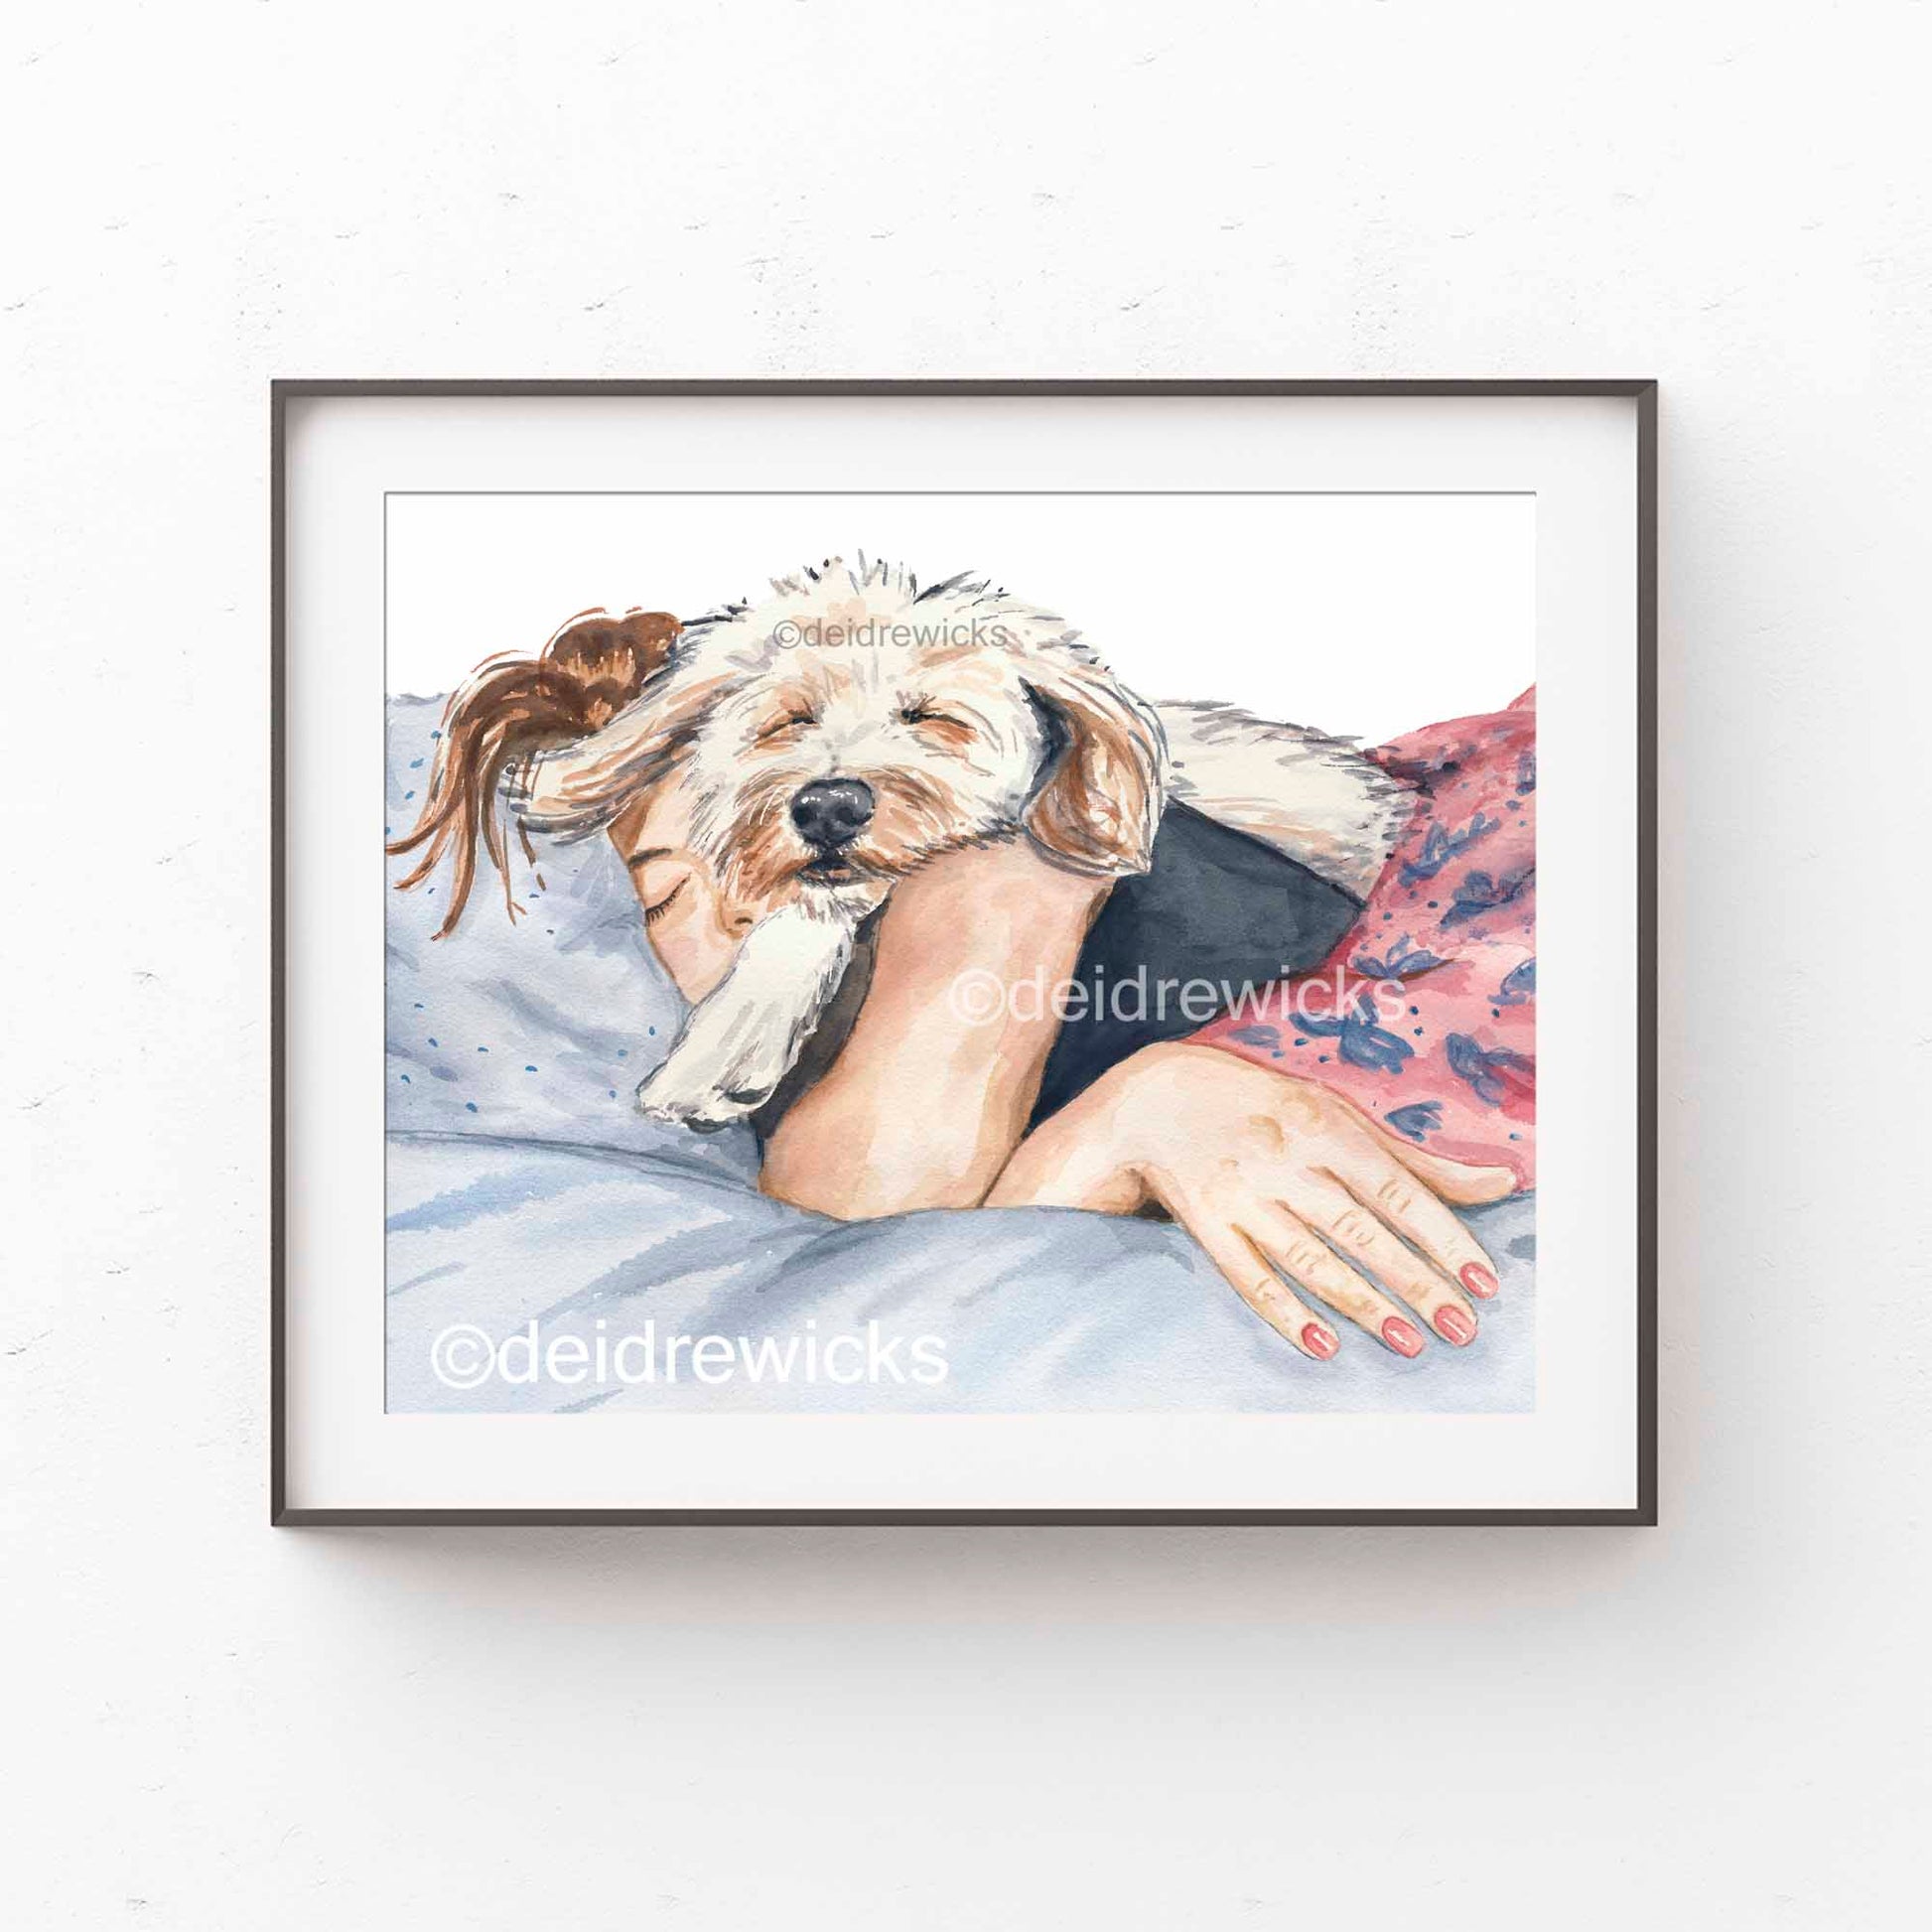 Example framing of a dog portrait watercolour painting by Deidre WIcks